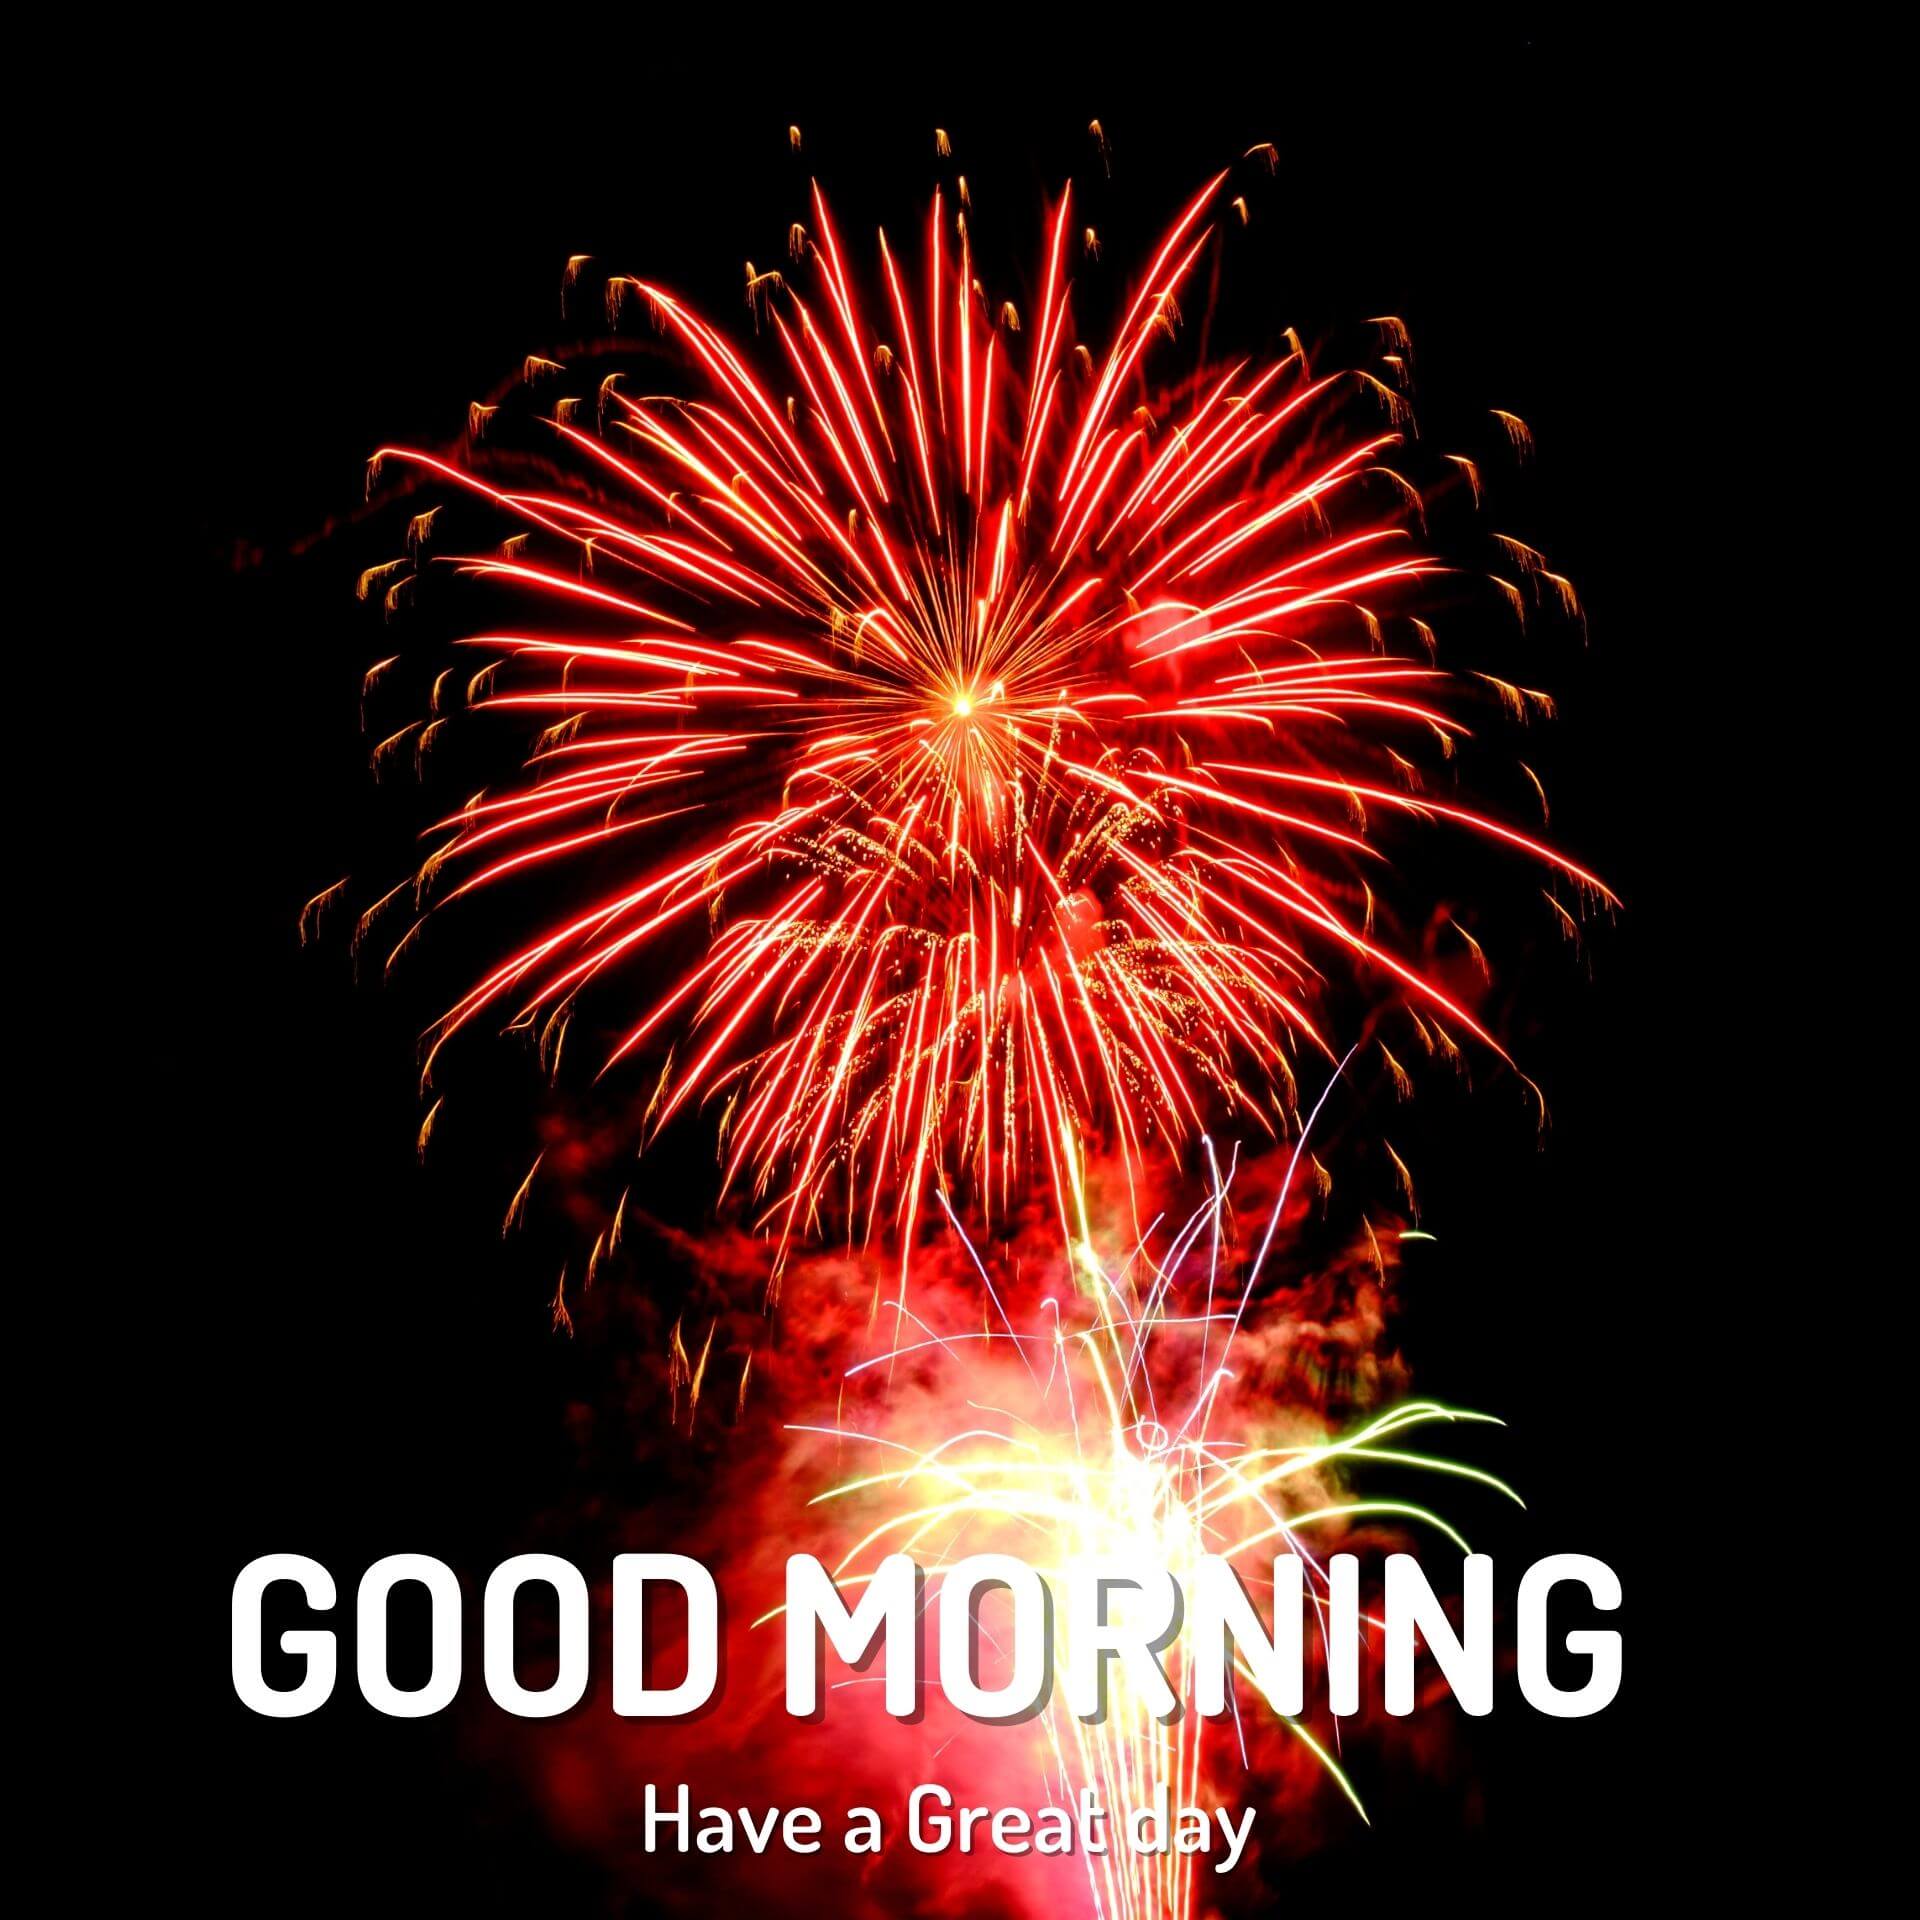 Good morning have a nice day Wallpaper Pics Free Download